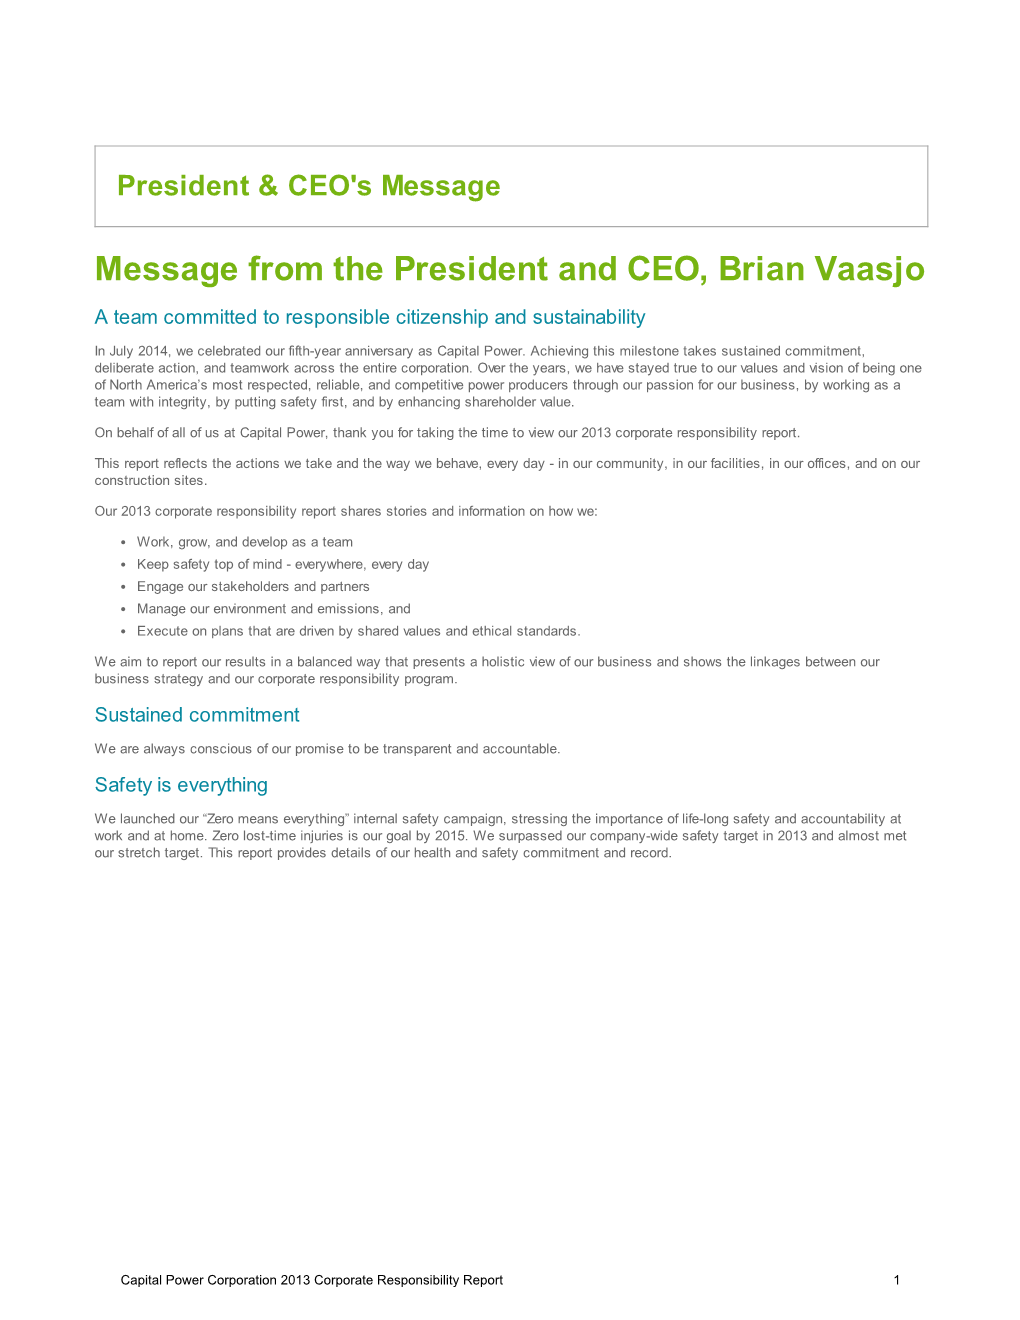 Message from the President and CEO, Brian Vaasjo